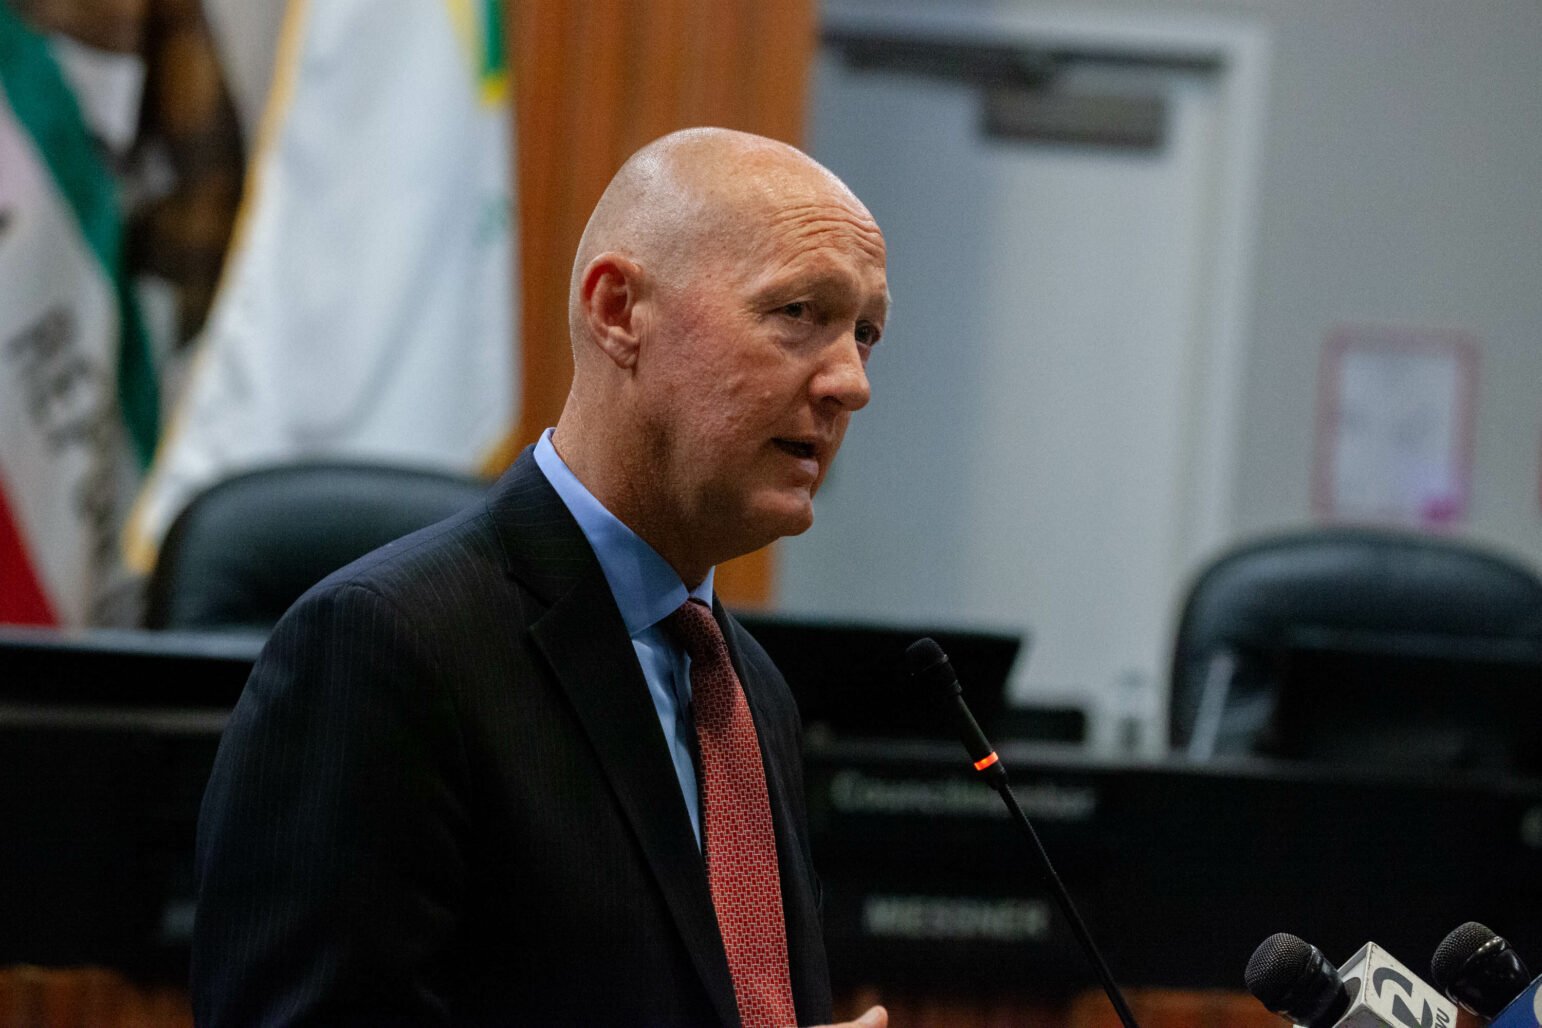 A man in a suit, identified as Greg Nyhoff, is speaking at a podium with a microphone. He appears to be addressing an audience in a city council chambers. Behind him, there are chairs and a California state flag is partially visible.